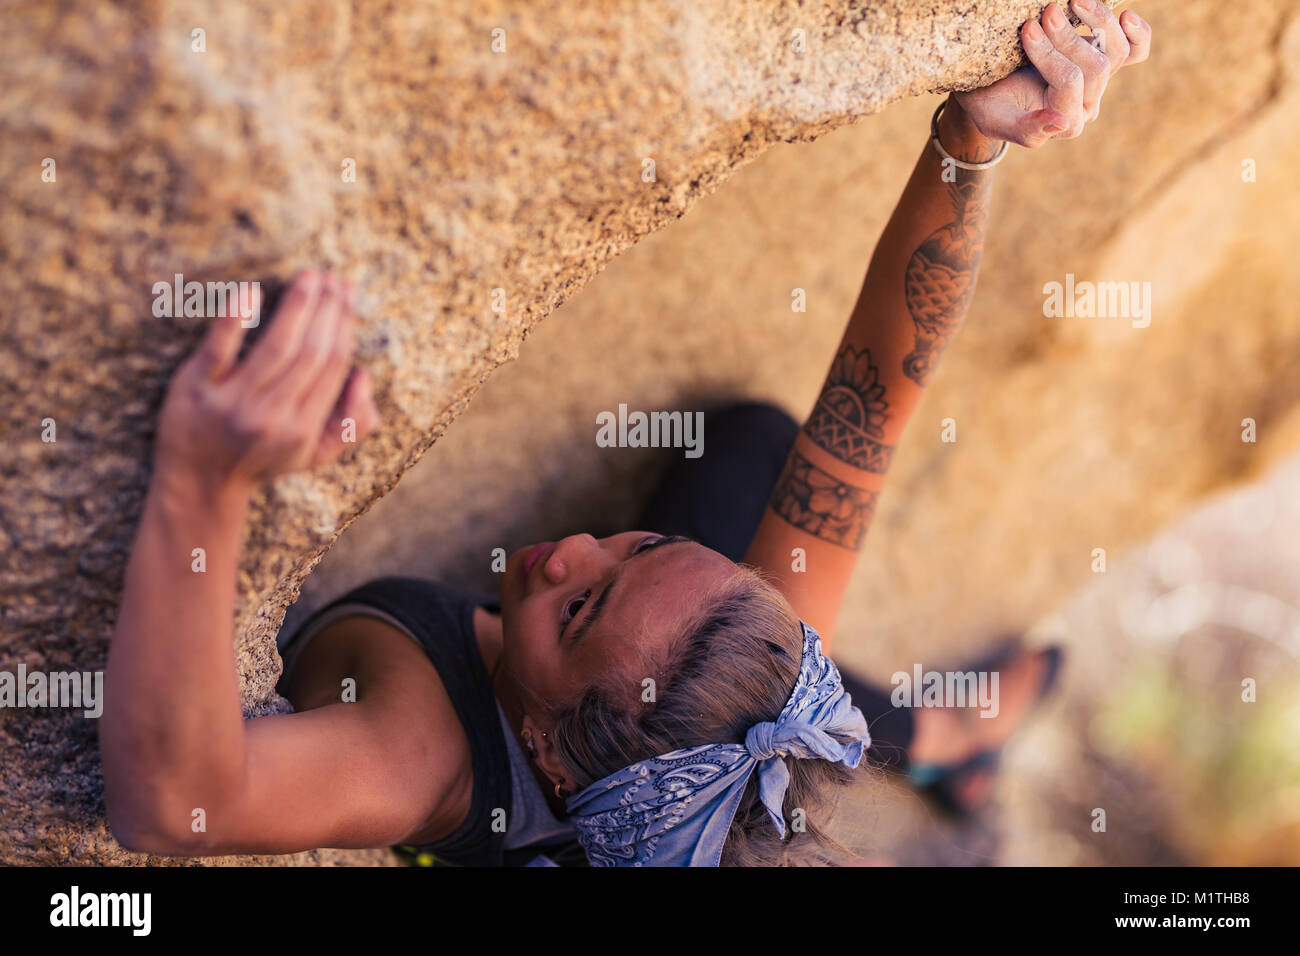 Closeup of petite asian woman rock climbing outdoors concentrates on the challenge Stock Photo